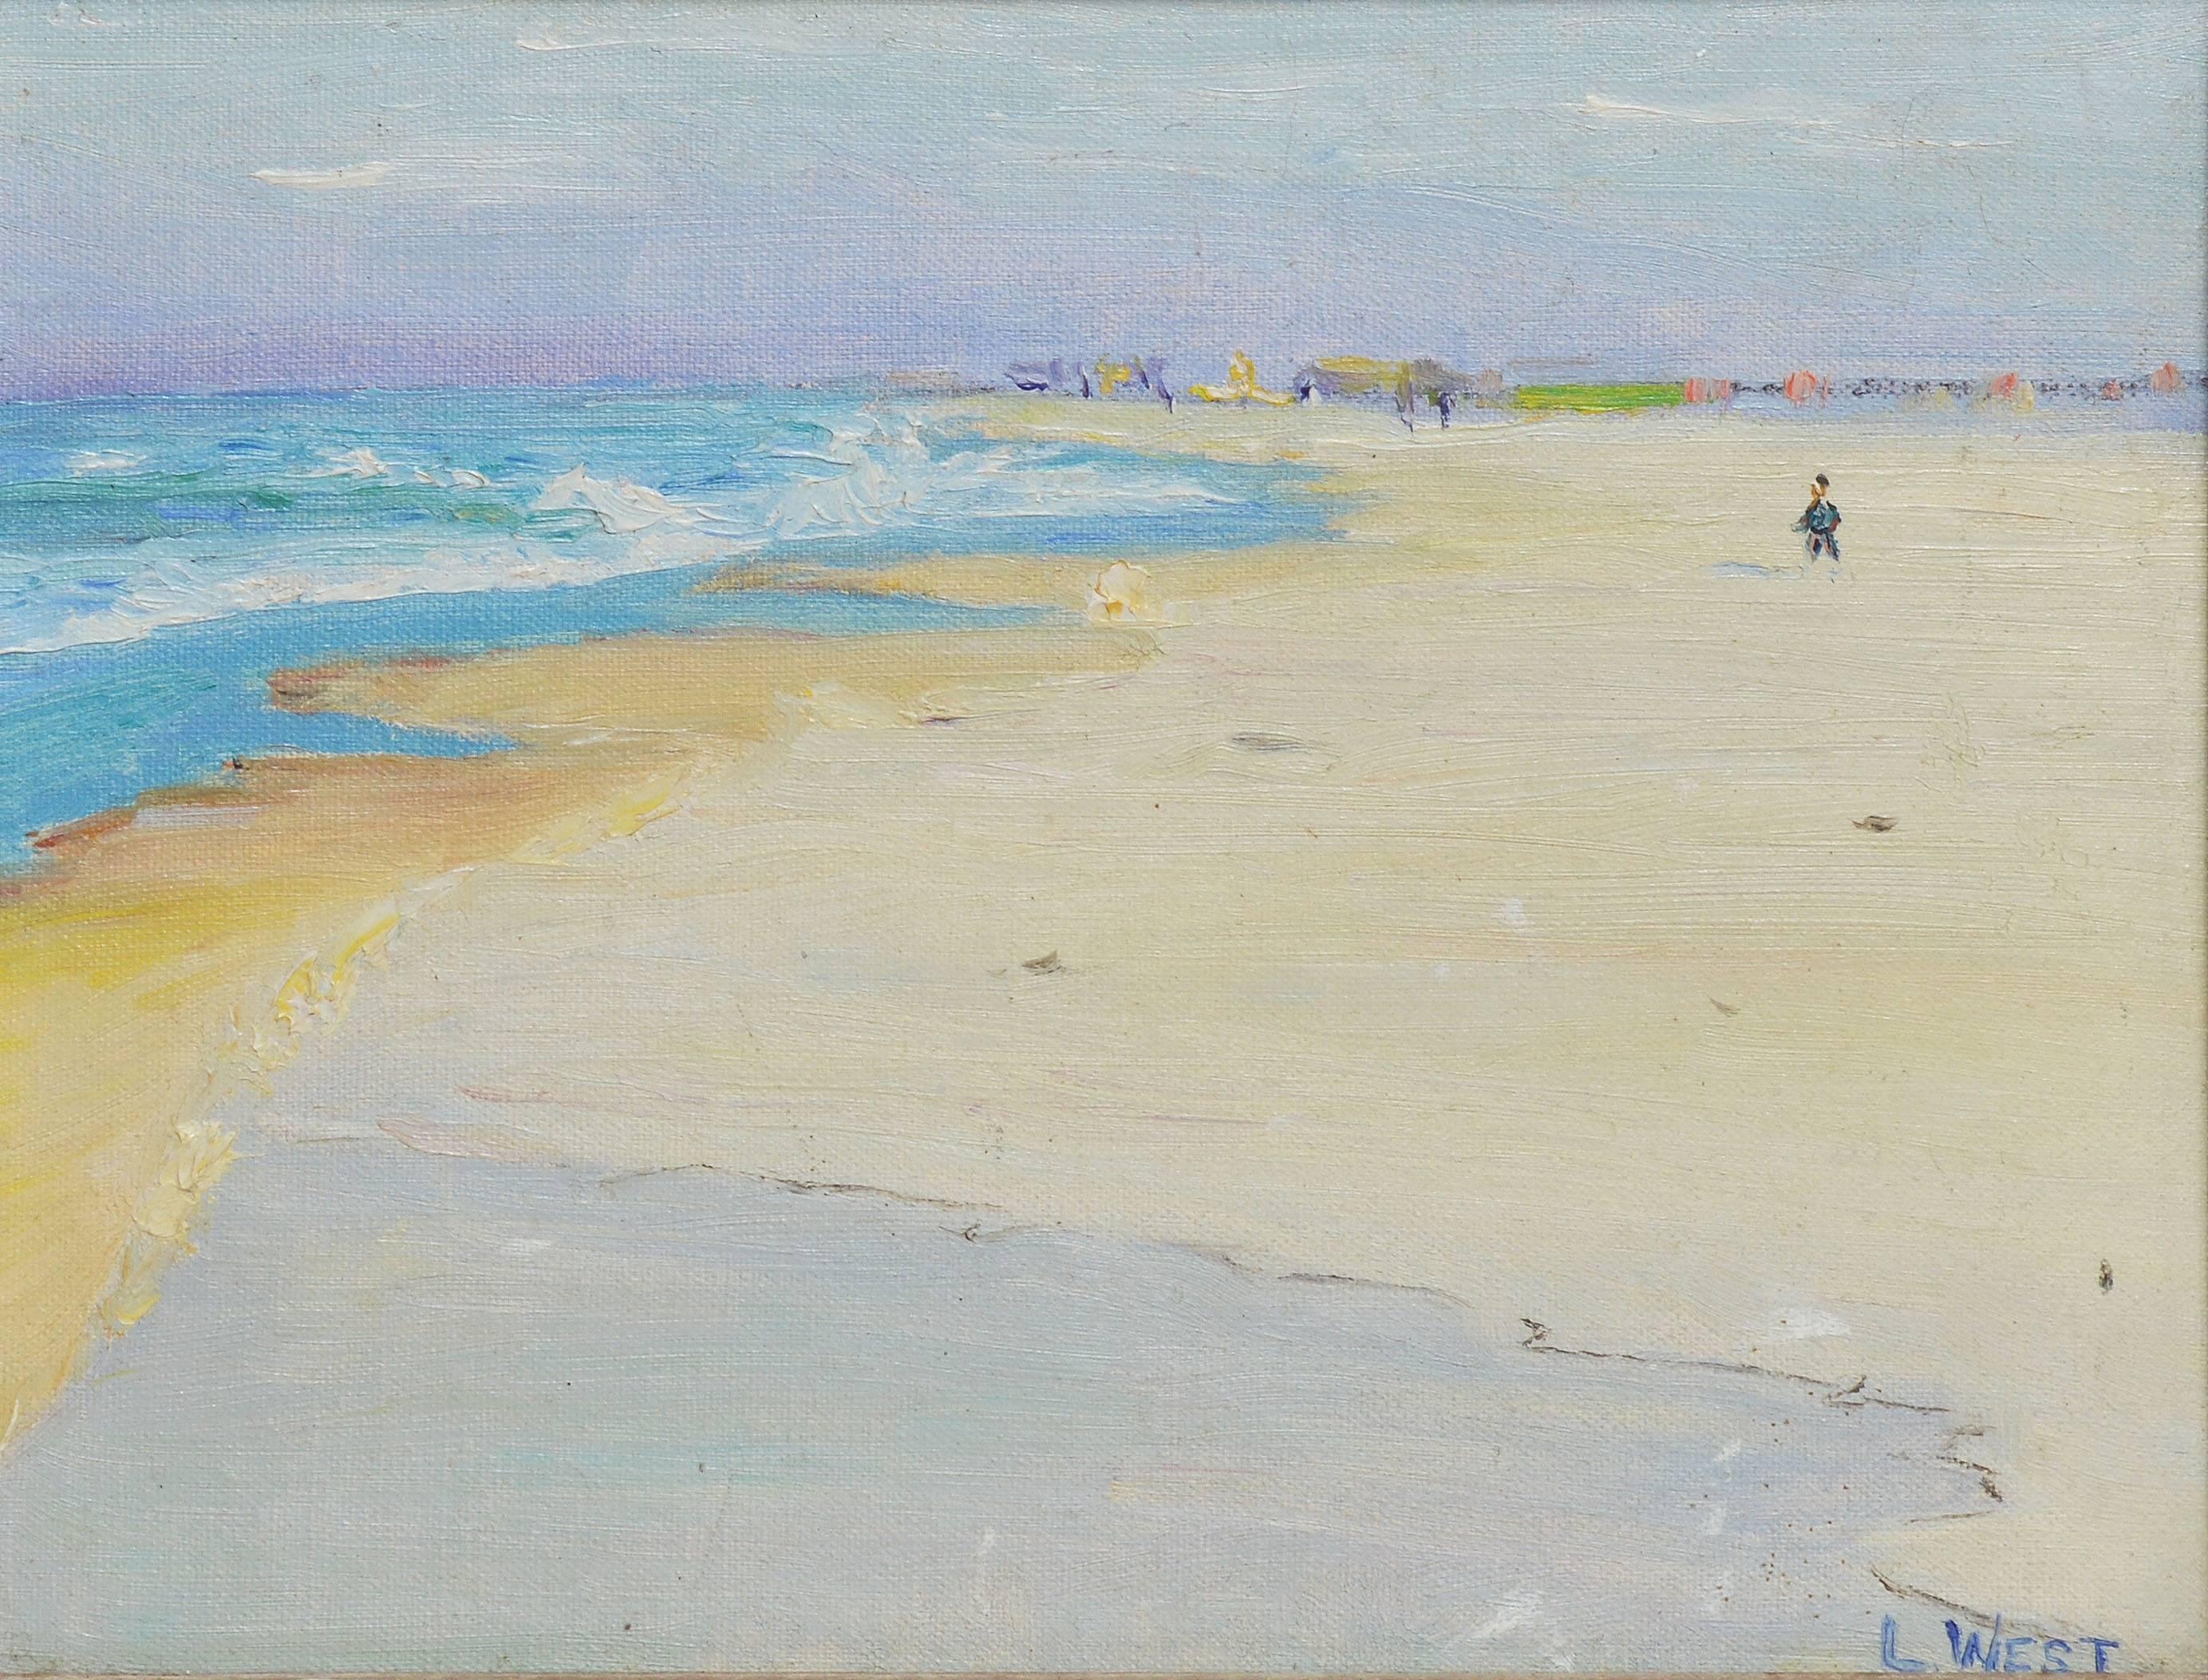 Antique American Impressionist Oil Painting, Hamptons Beach View by Louise West 1